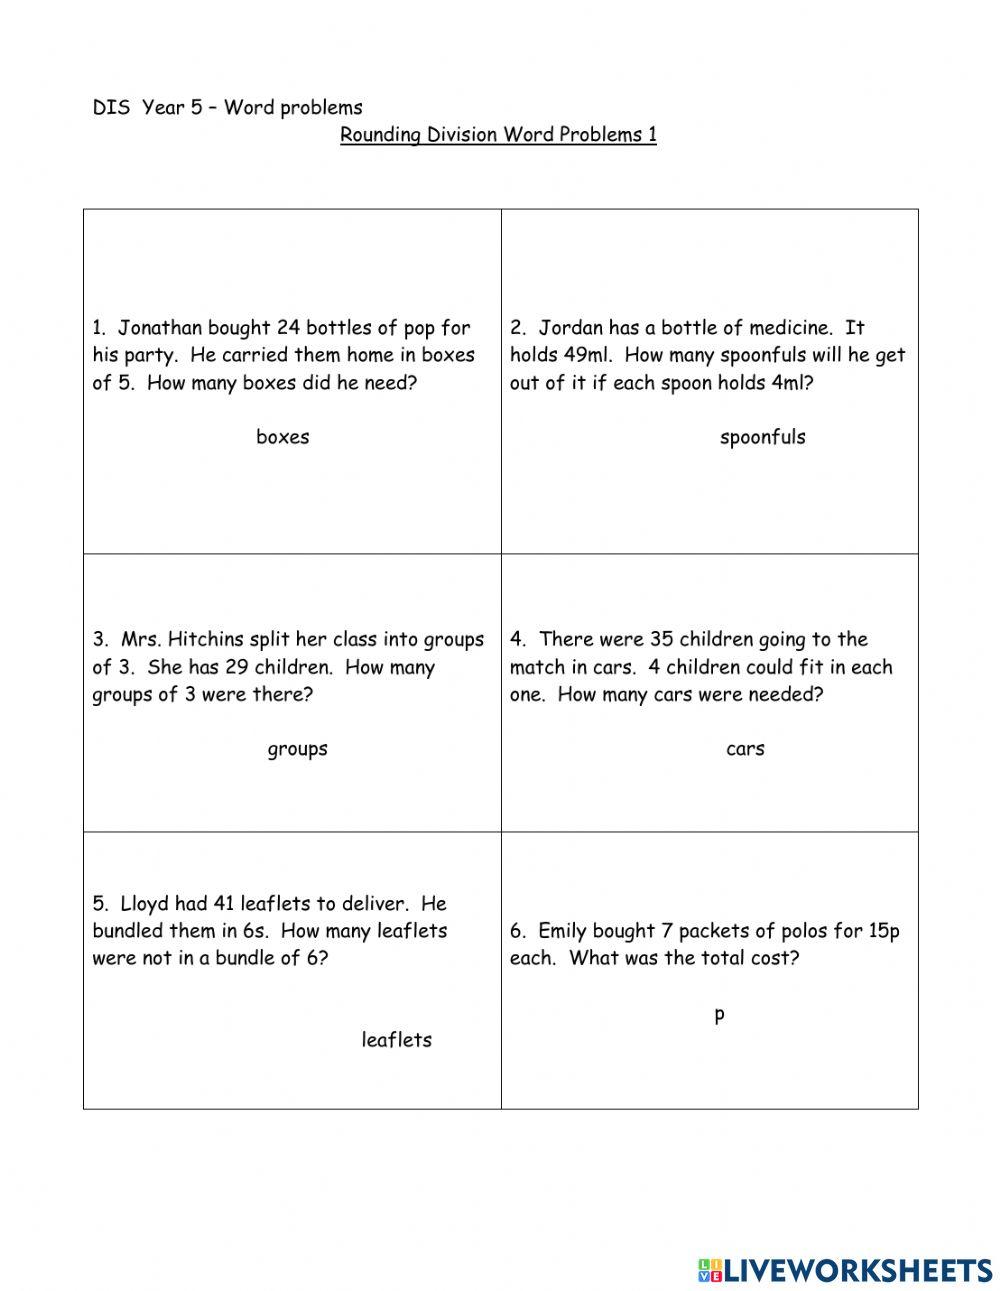 DIS  Year 5 – Rounding Division Word Problems 1